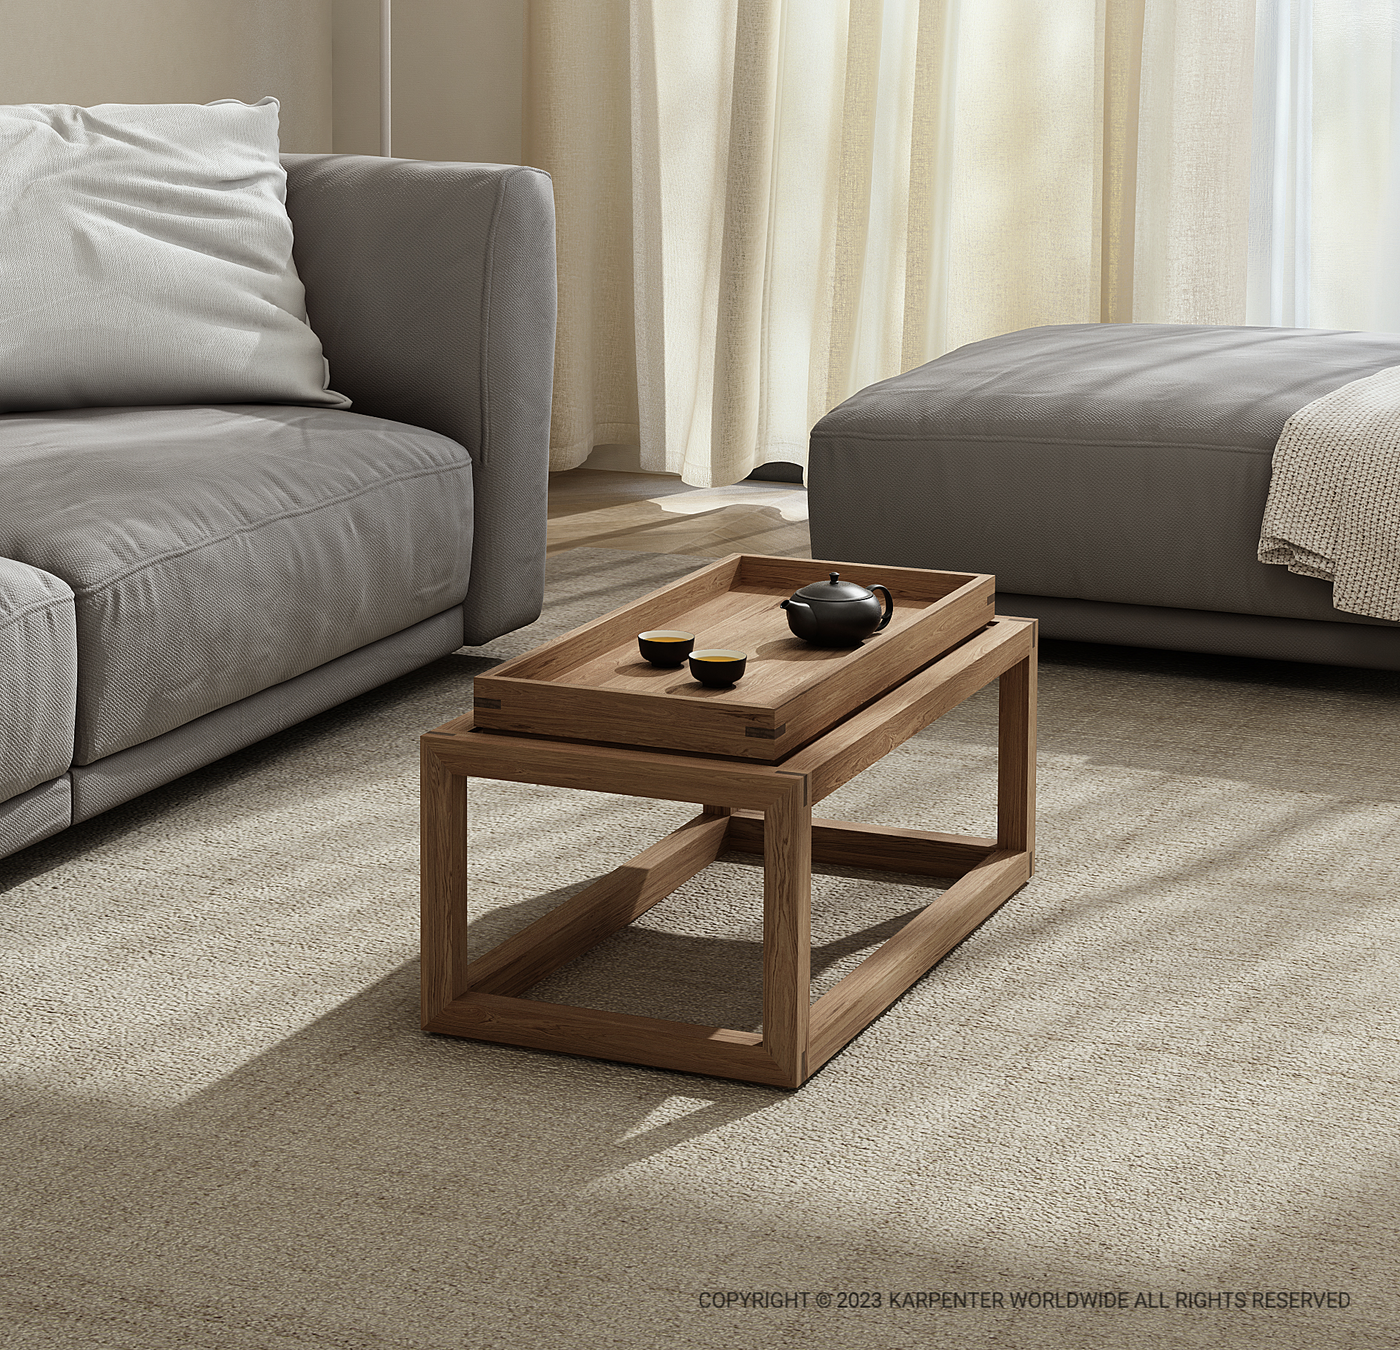 Up and Down Large Coffee Table - European Oak